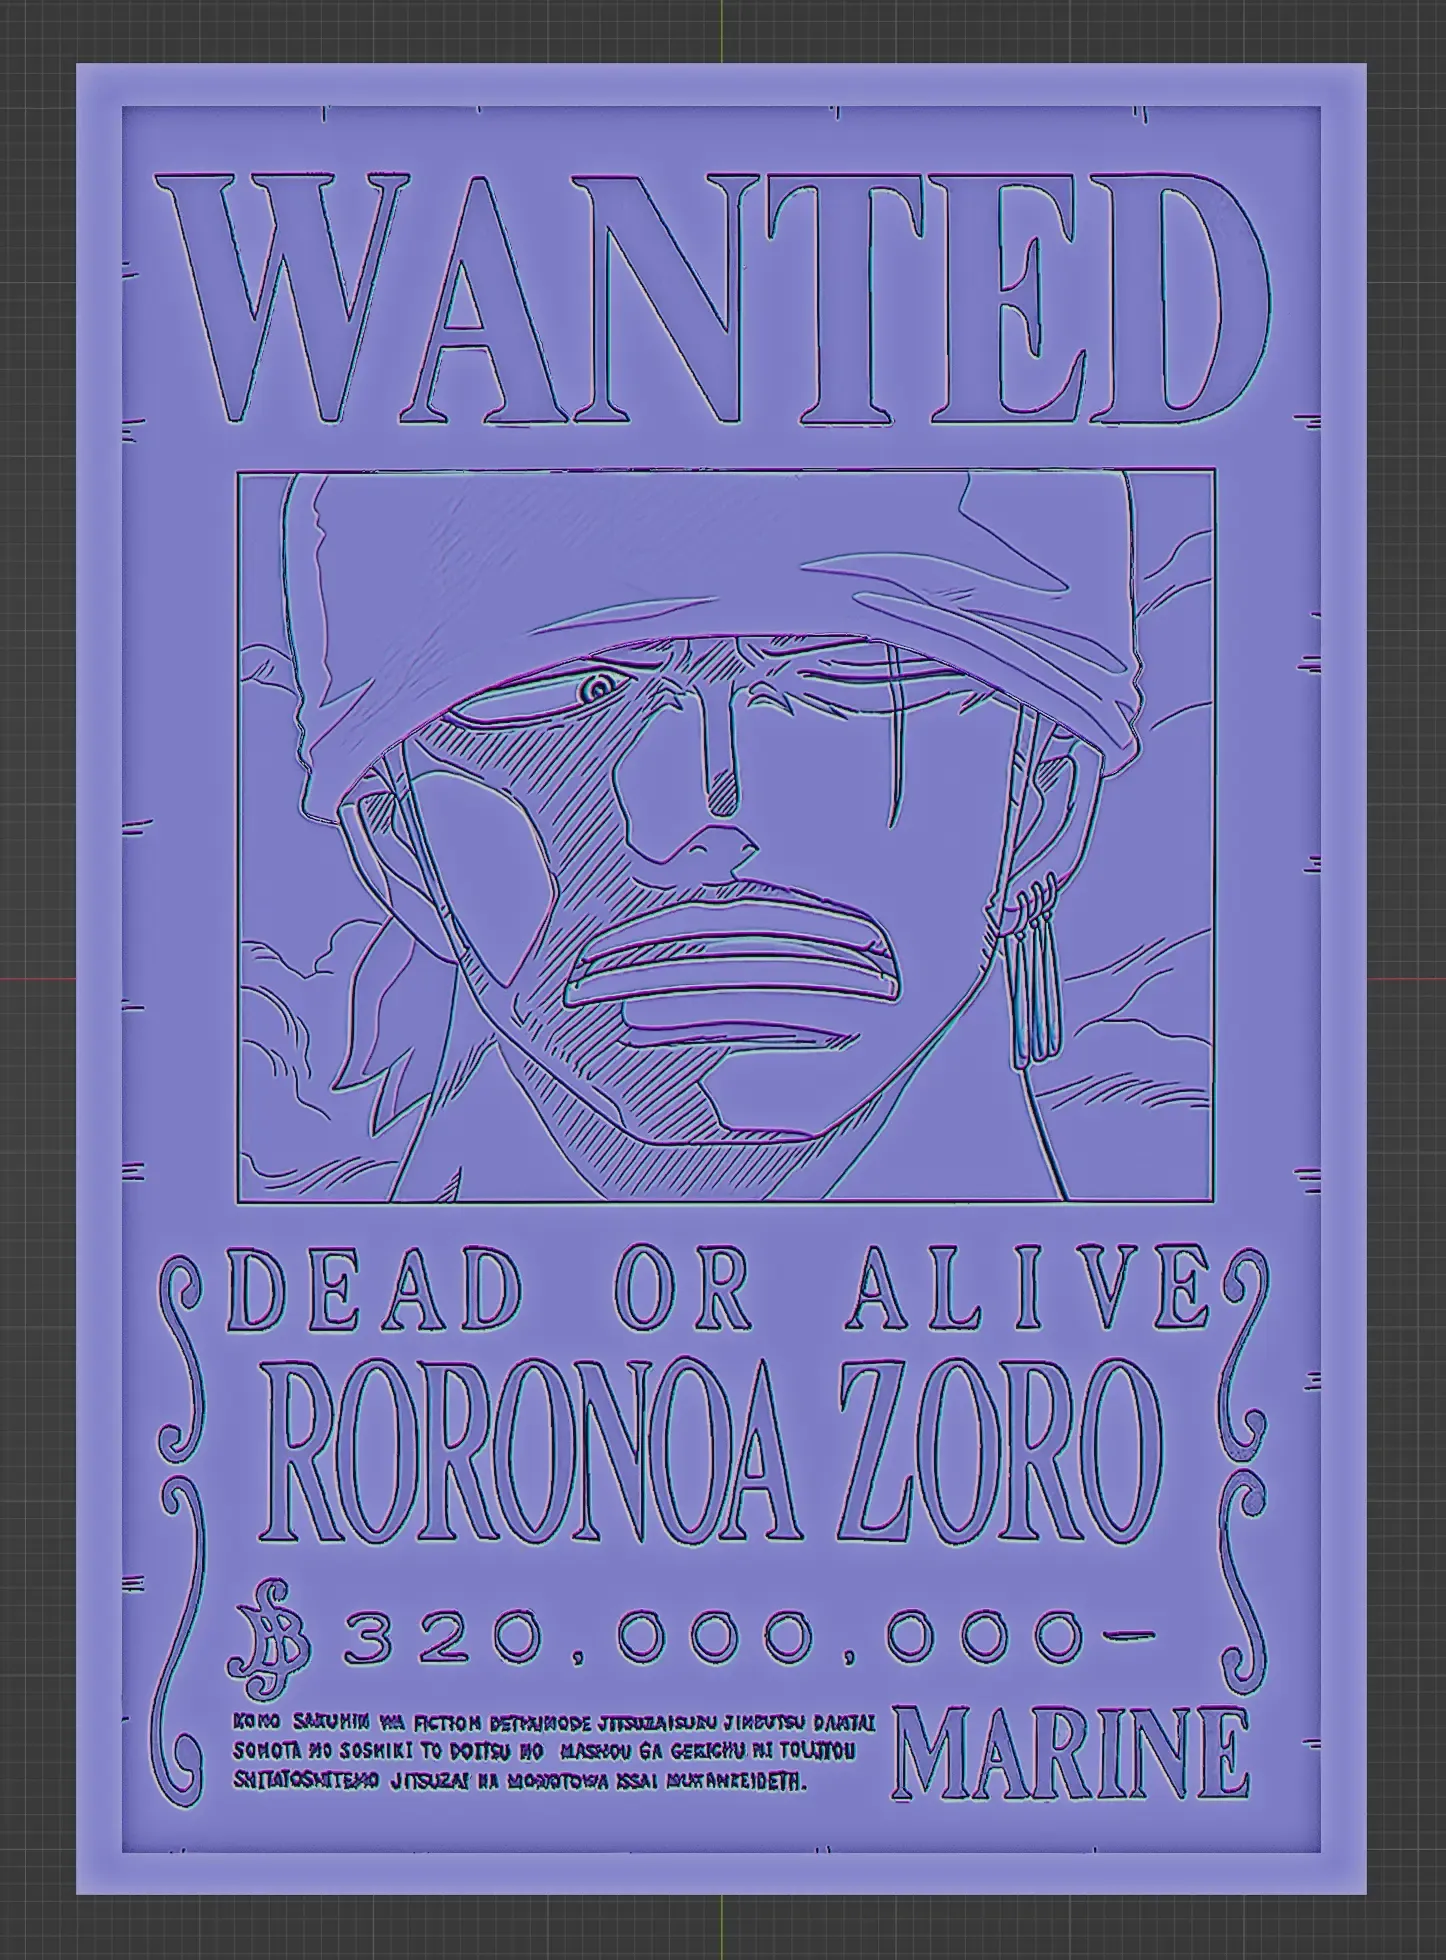 ZORO WANTED POSTER - ONE PIECE